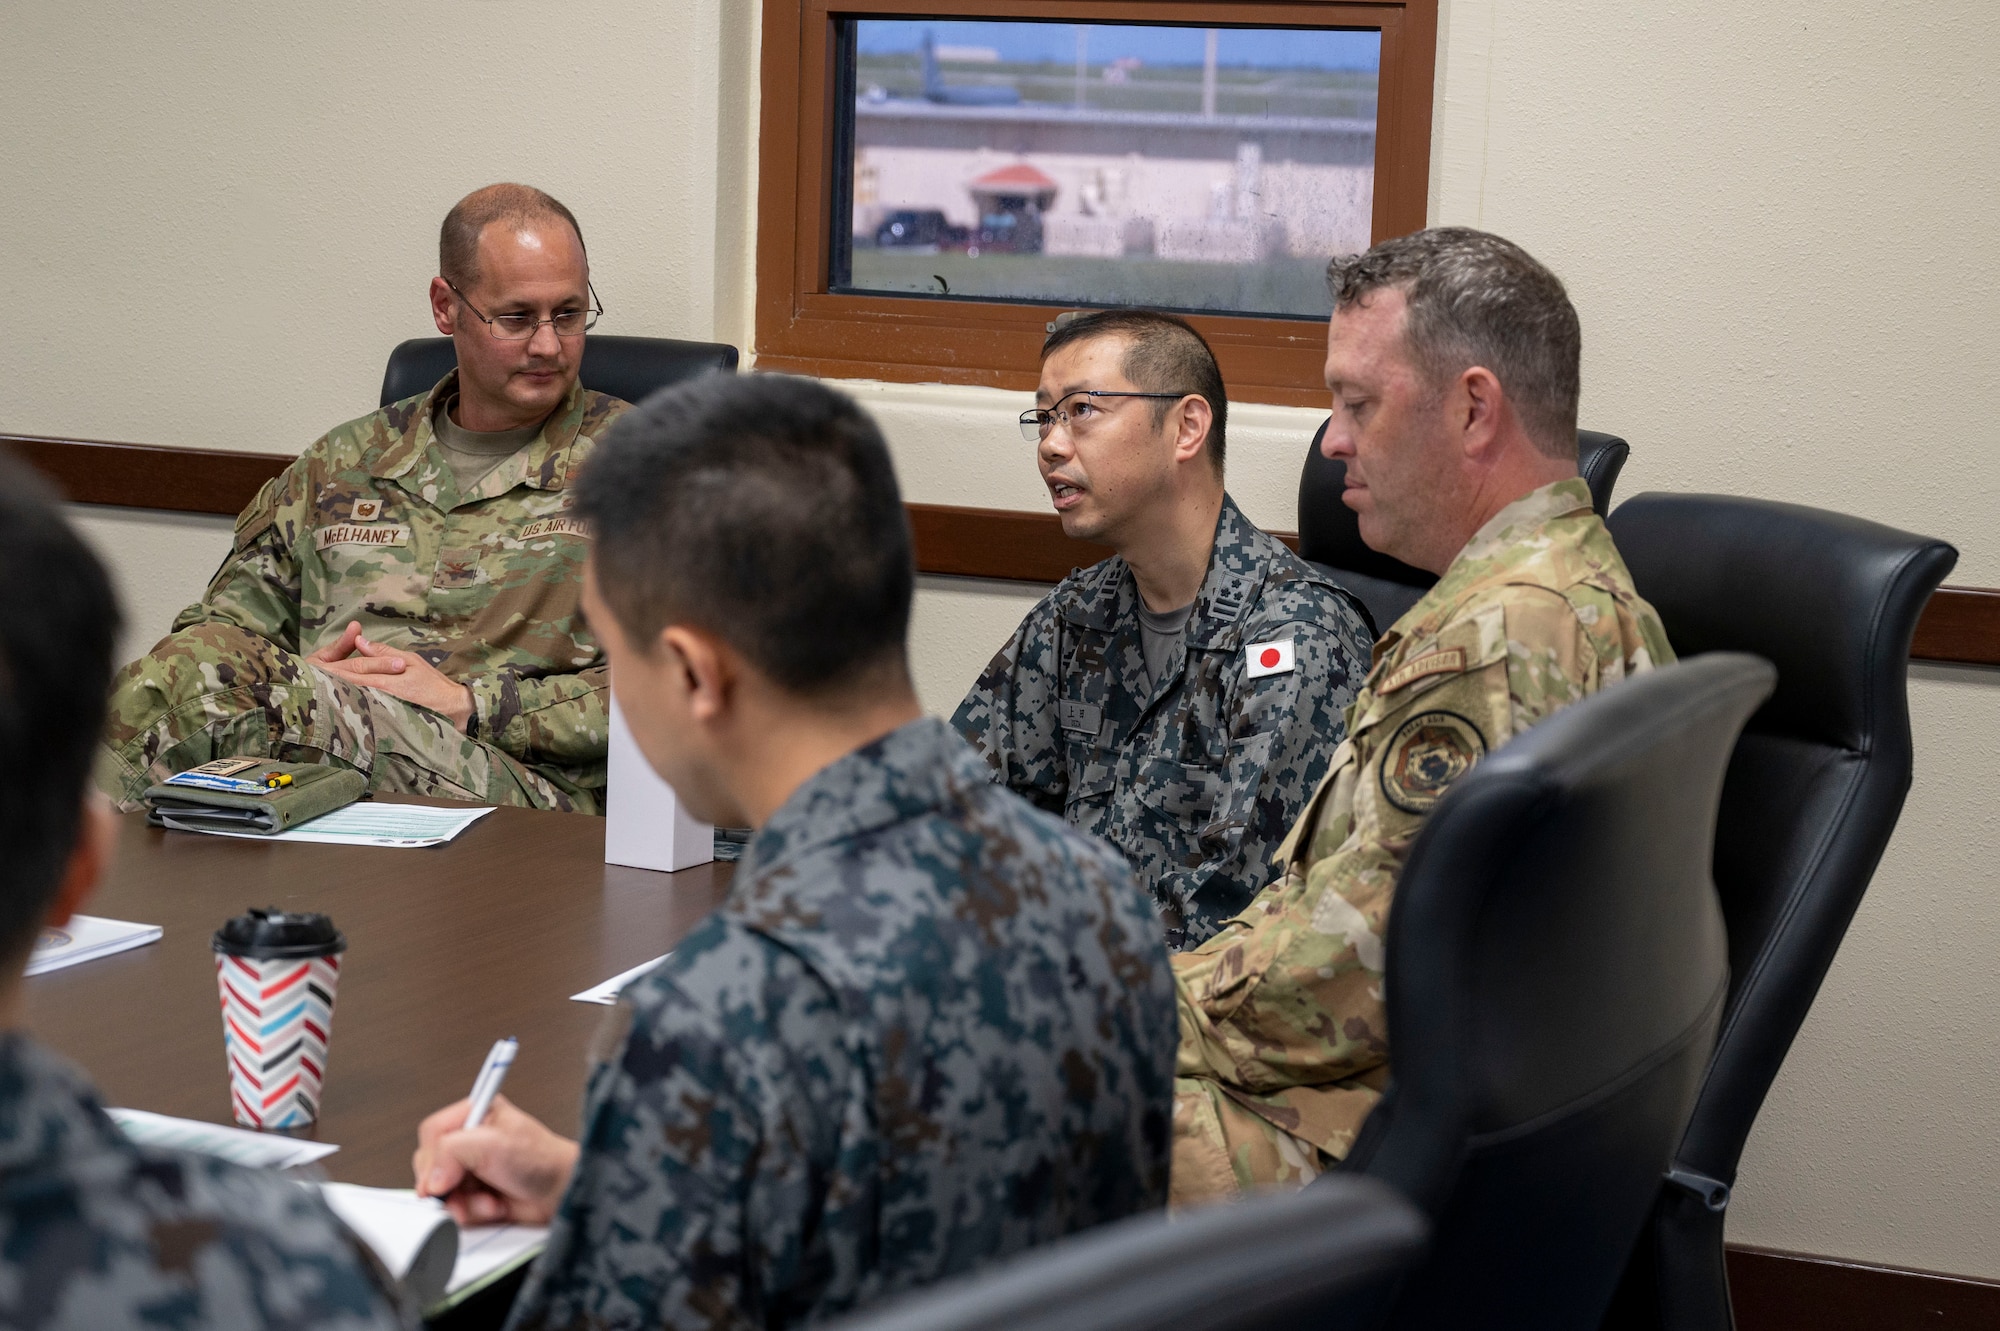 U.S. Air Force, Philippine Air Force and Japan Air Self-Defense Force leaders have a discussion at Andersen Air Force Base, Guam, Nov. 2, 2023. The 36th Contingency Response Group and the 36th Tactical Advisory Squadron hosted a trilateral discussion to facilitate discussions on regional security concerns, humanitarian aid and disaster relief, exercises, and operations. (U.S. Air Force photo by Senior Airman Emily Saxton)